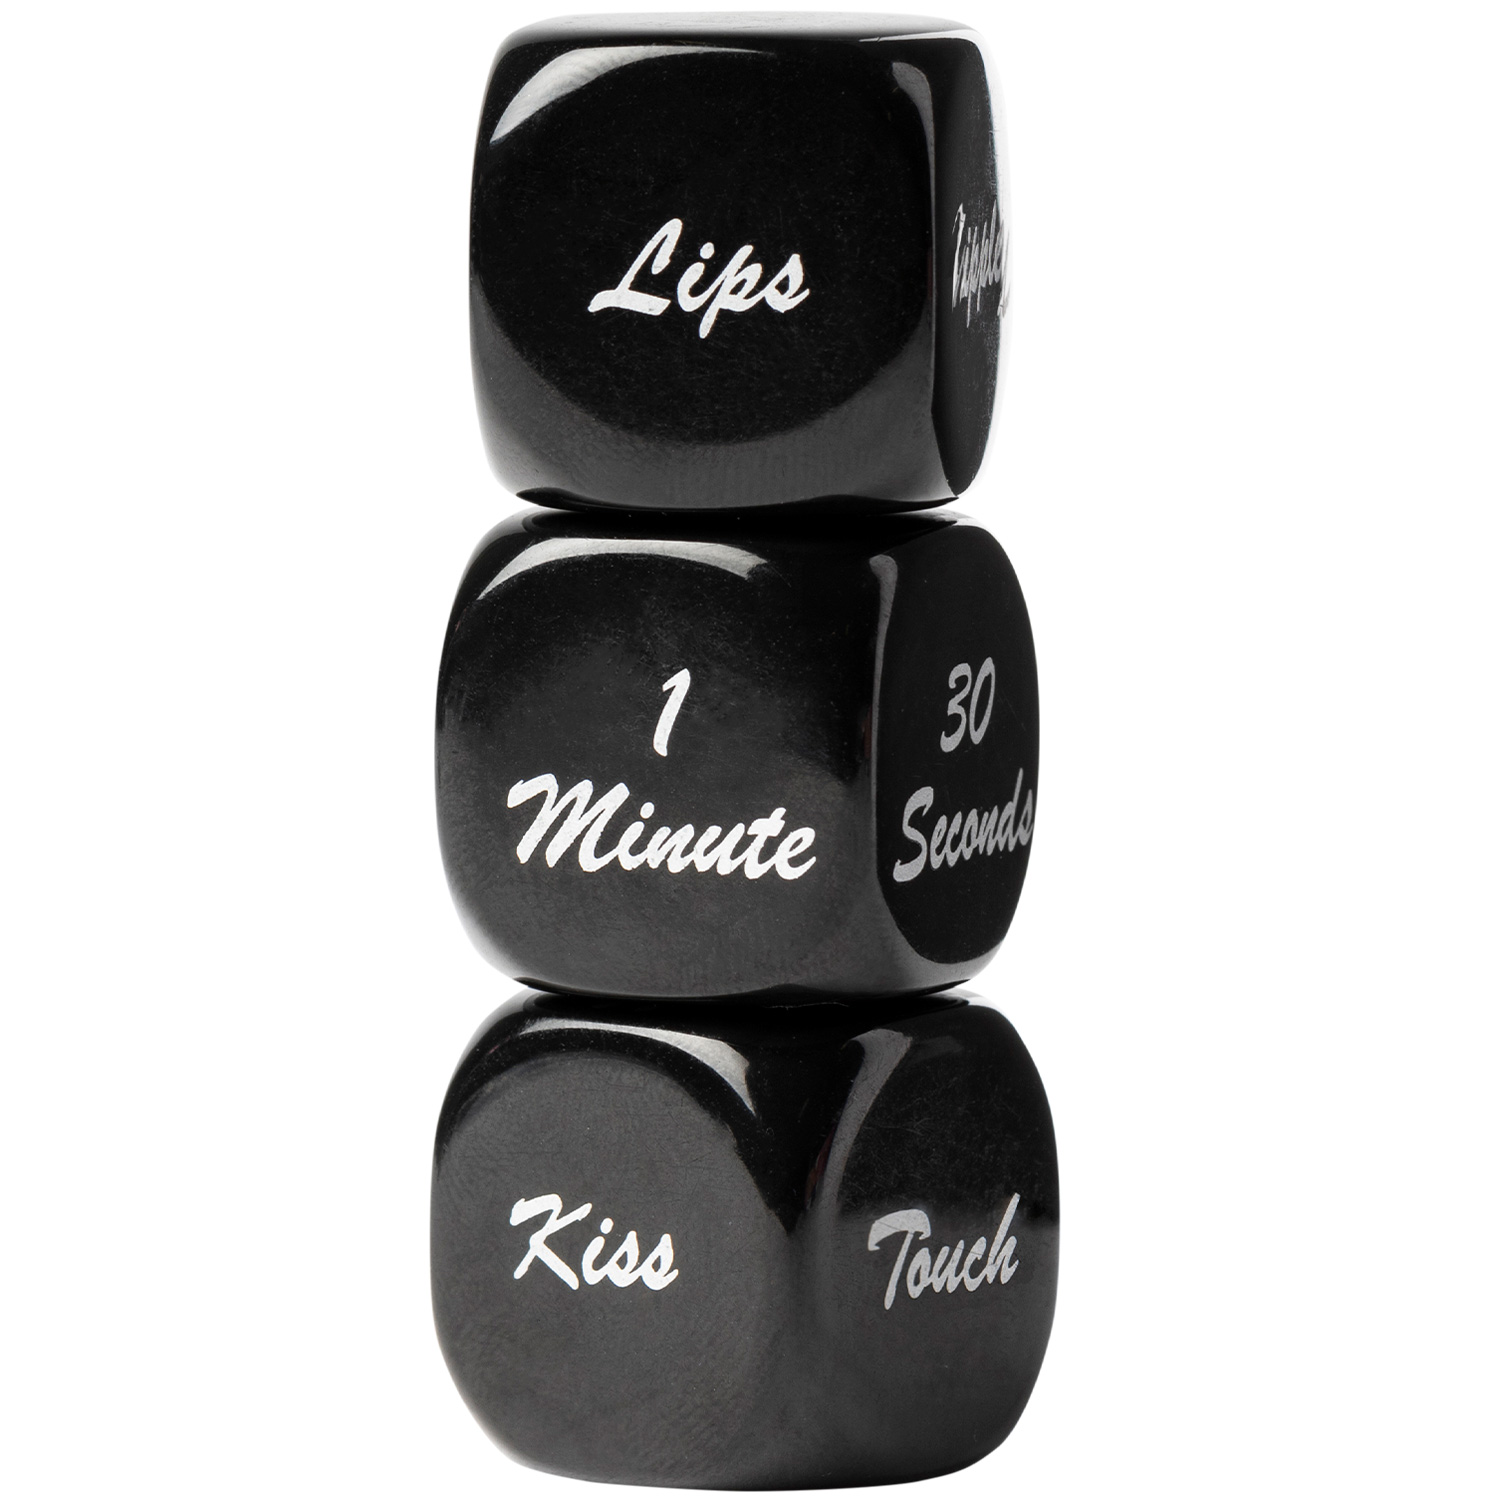 21320-sinful-erotic-play-dice-_3-pack_-q100-01